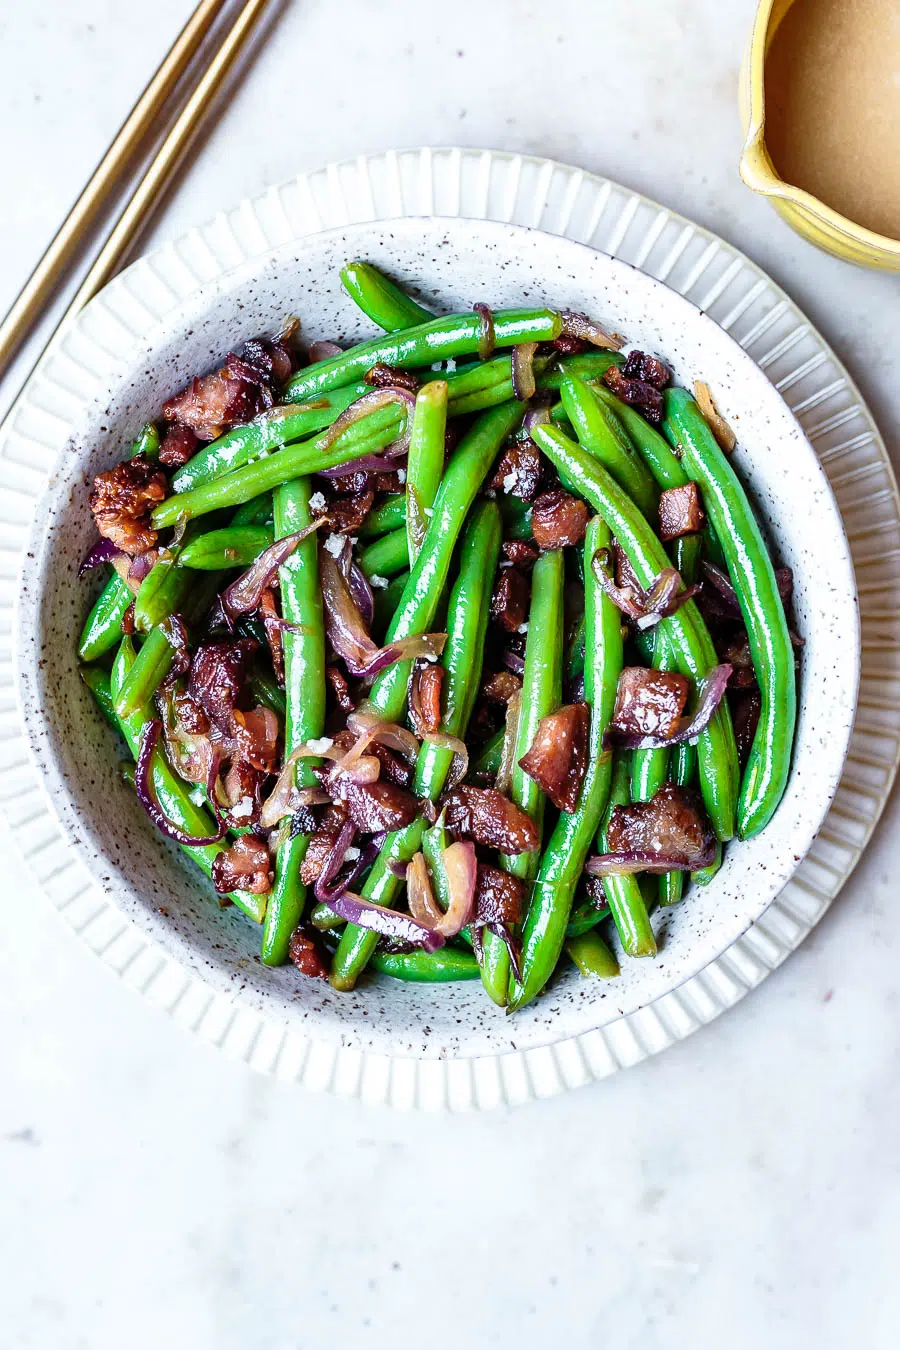 this warm green beans salad with bacon in a white serving bowl